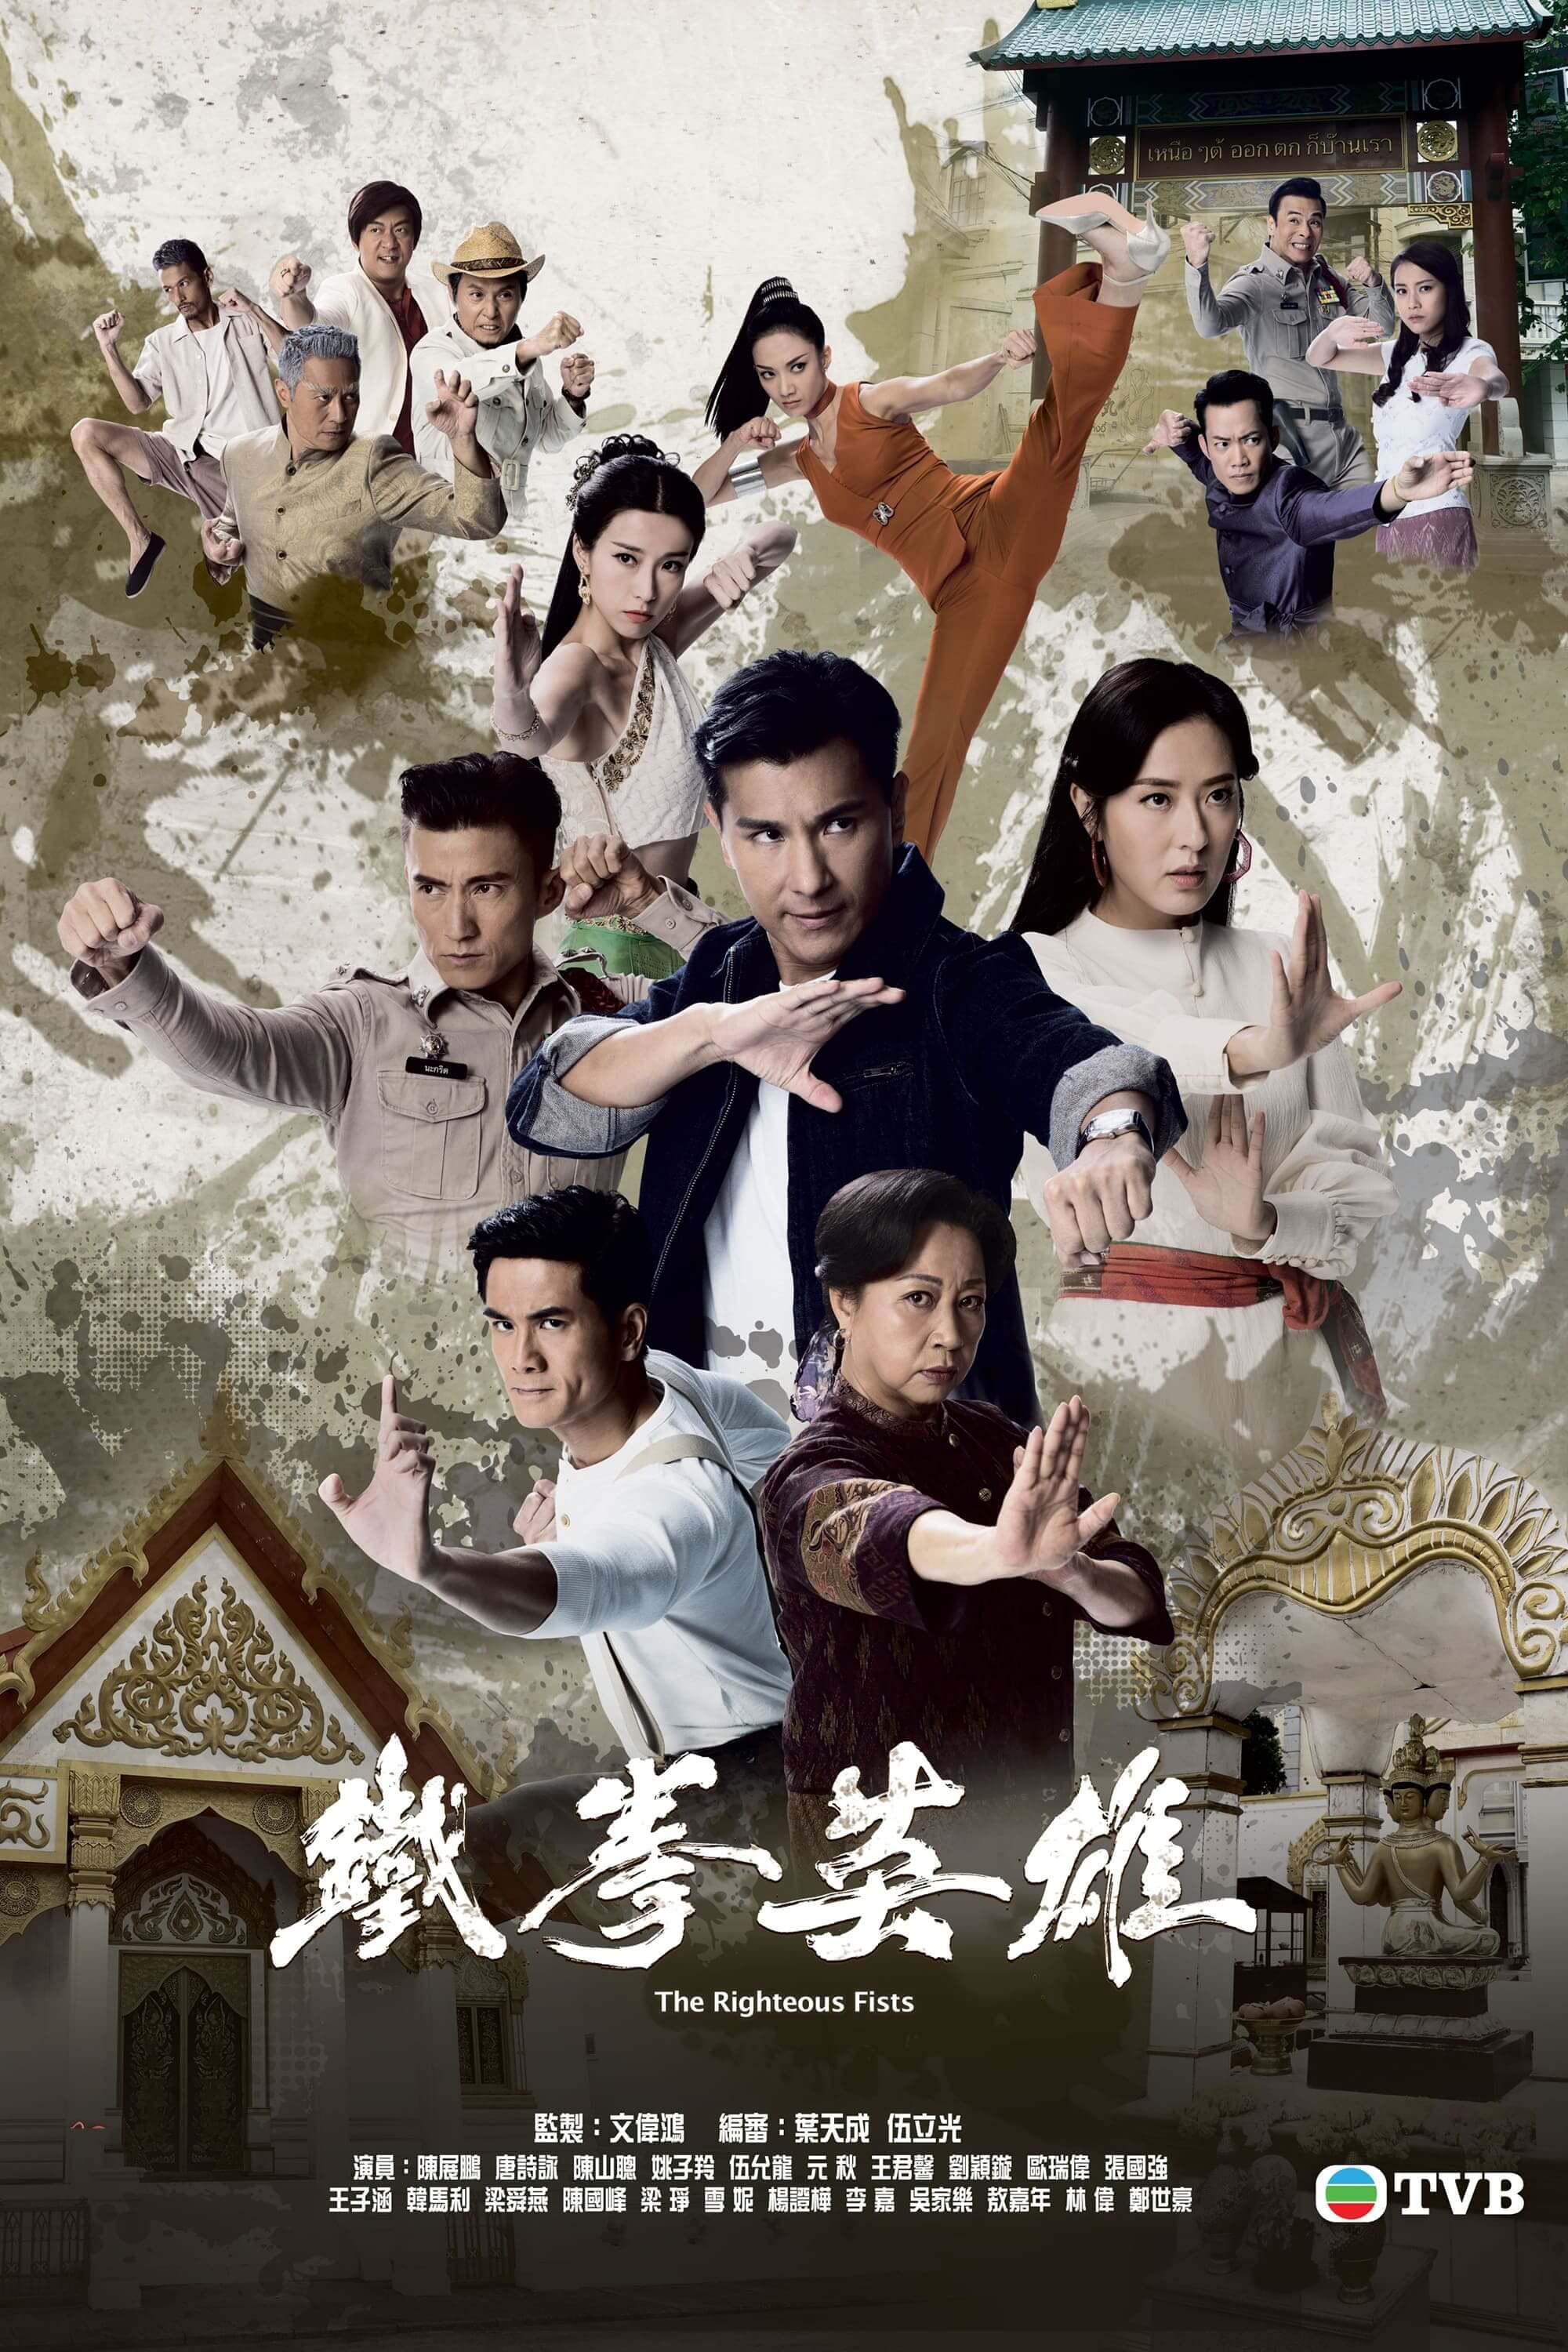 TV ratings for The Righteous Fists (唐人街) in Polonia. TVB Jade TV series